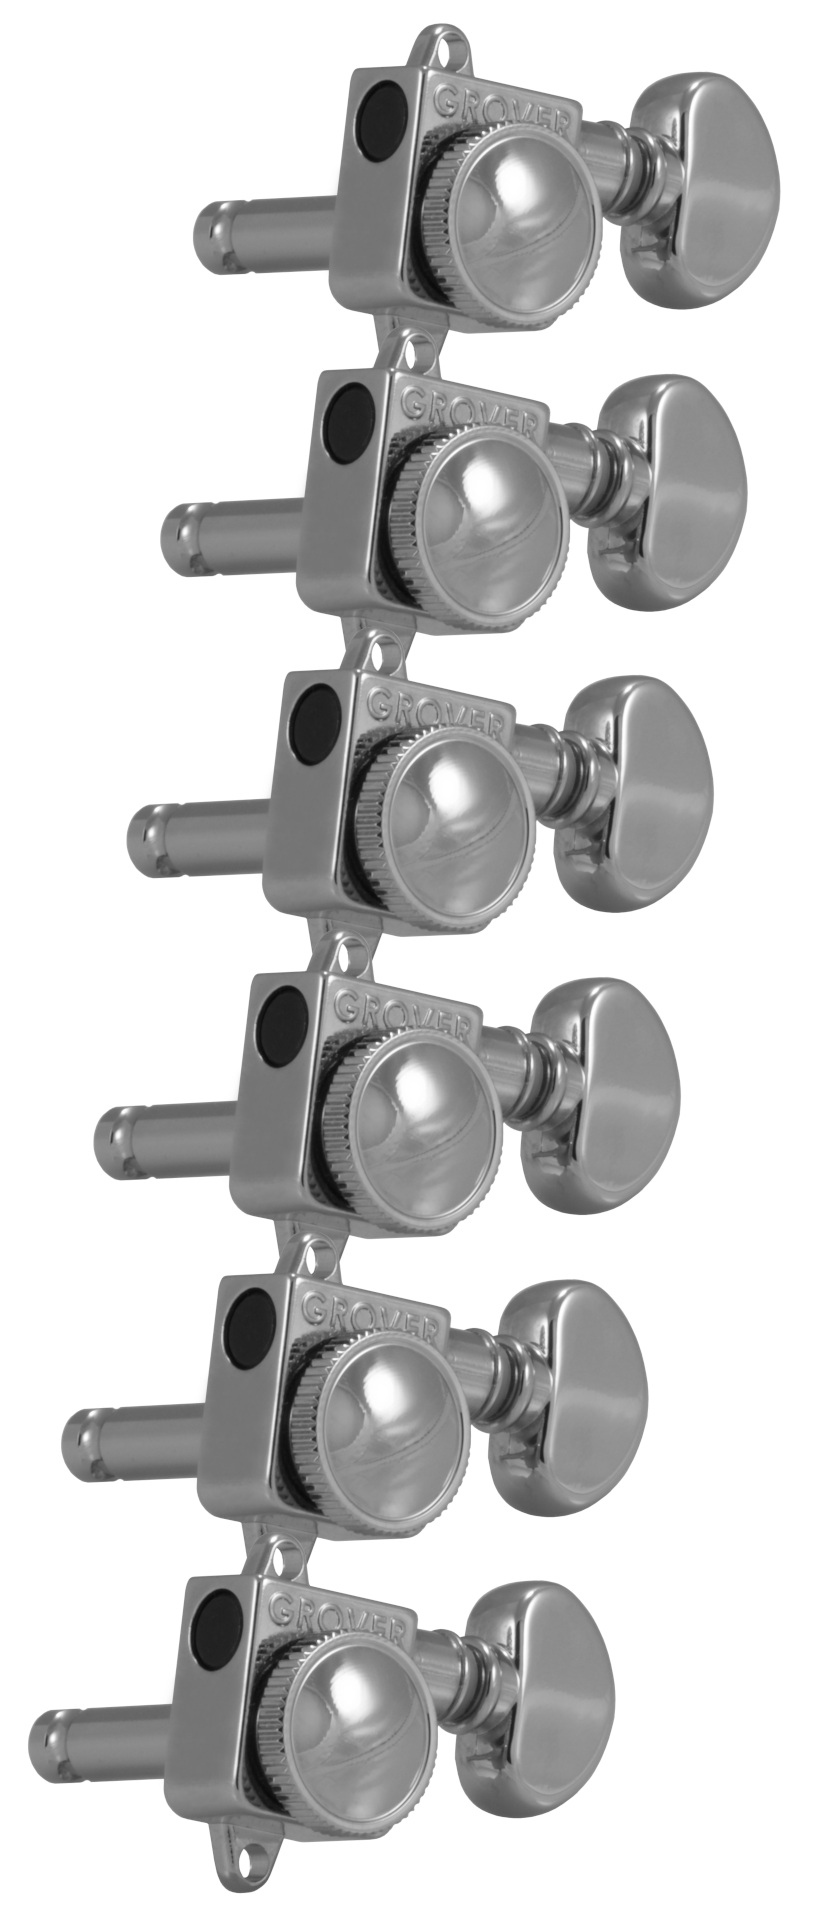 Grover 505FVC Roto-Grip Locking Rotomatics for Vintage F-Style Tuners - Guitar Machine Heads, 6-in-Line, Bass Side (Left) - Chrome